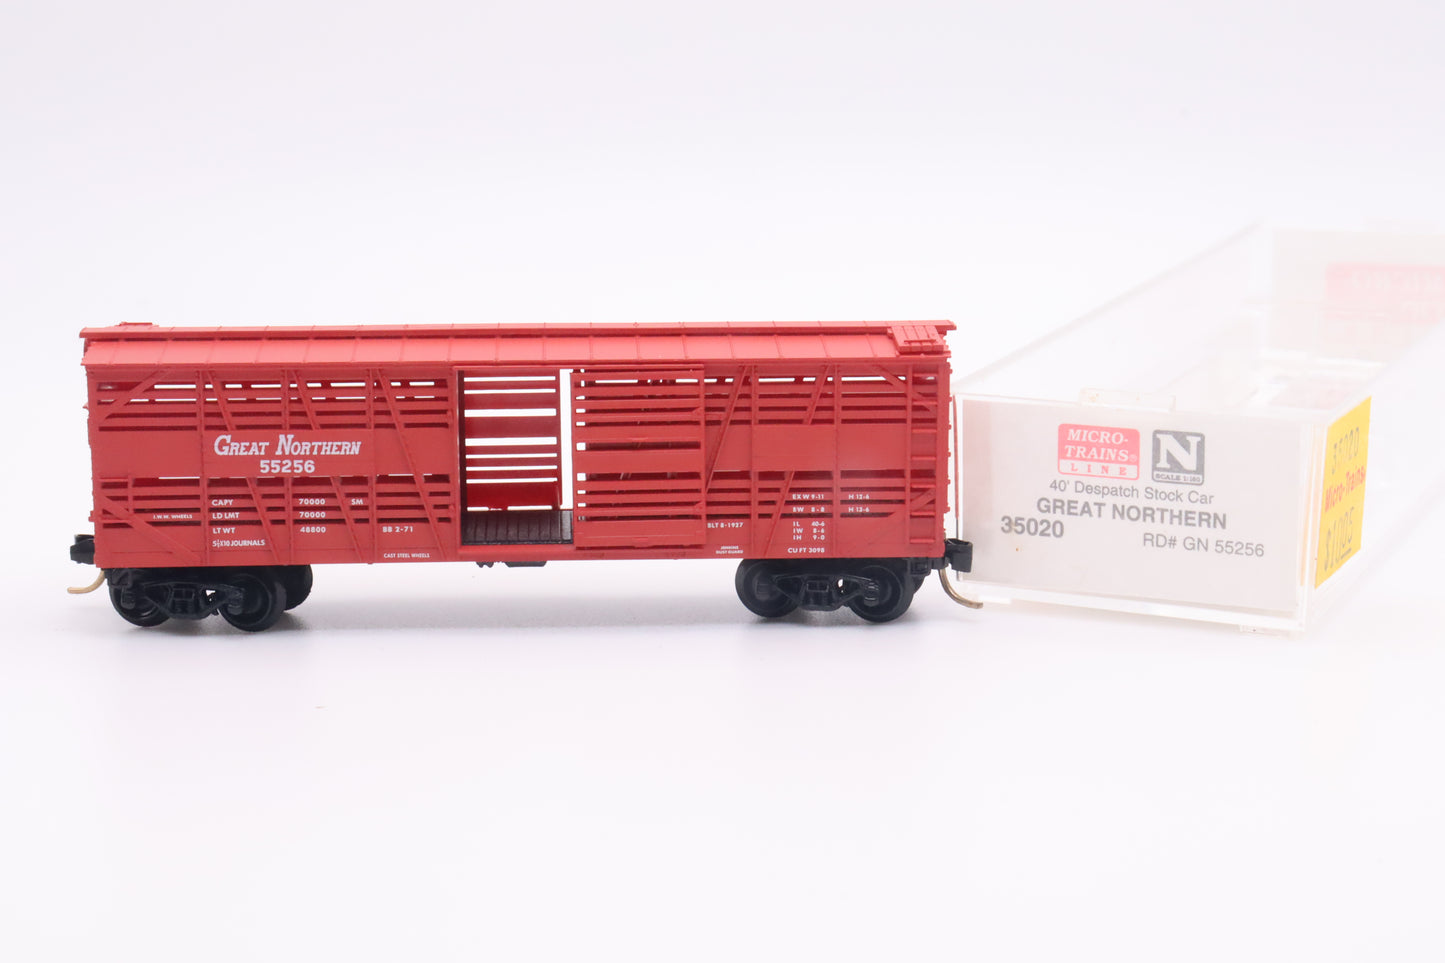 MTL-35020 - 40' Despatch Stock Car - Great Northern - GN-55256